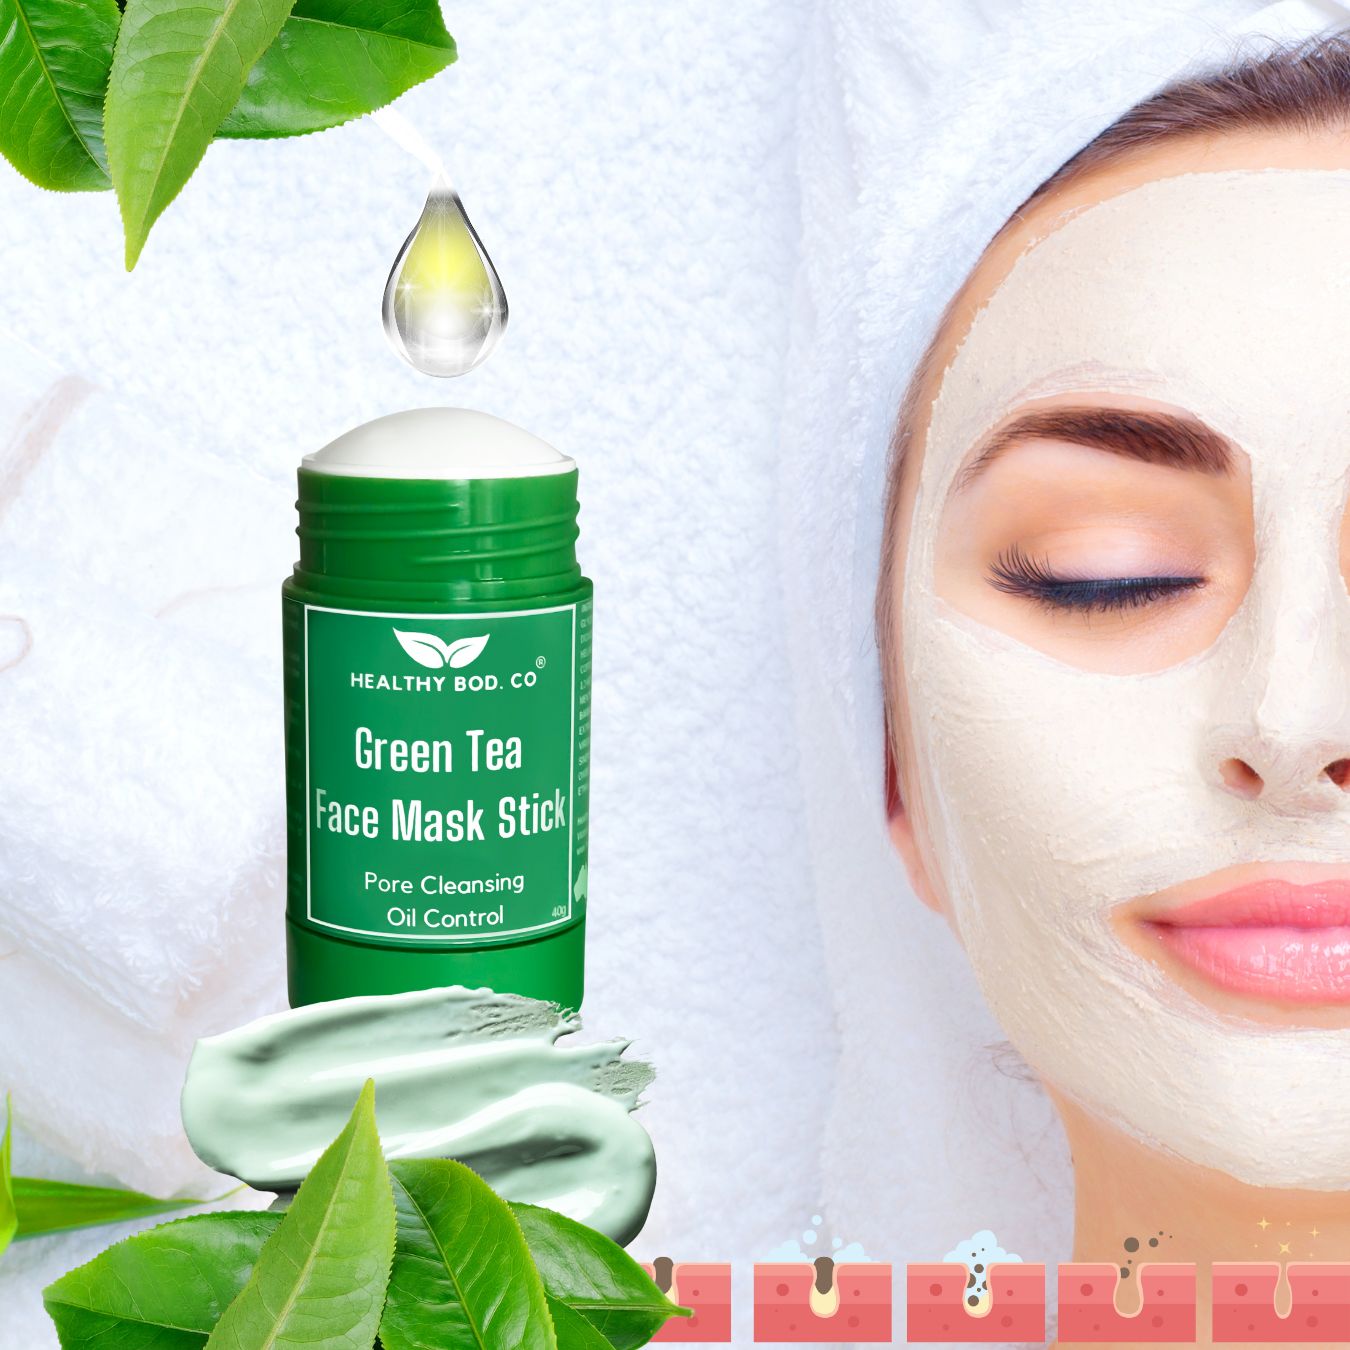 Oil Control and Skin Renewal with Green Tea Face Mask Stick